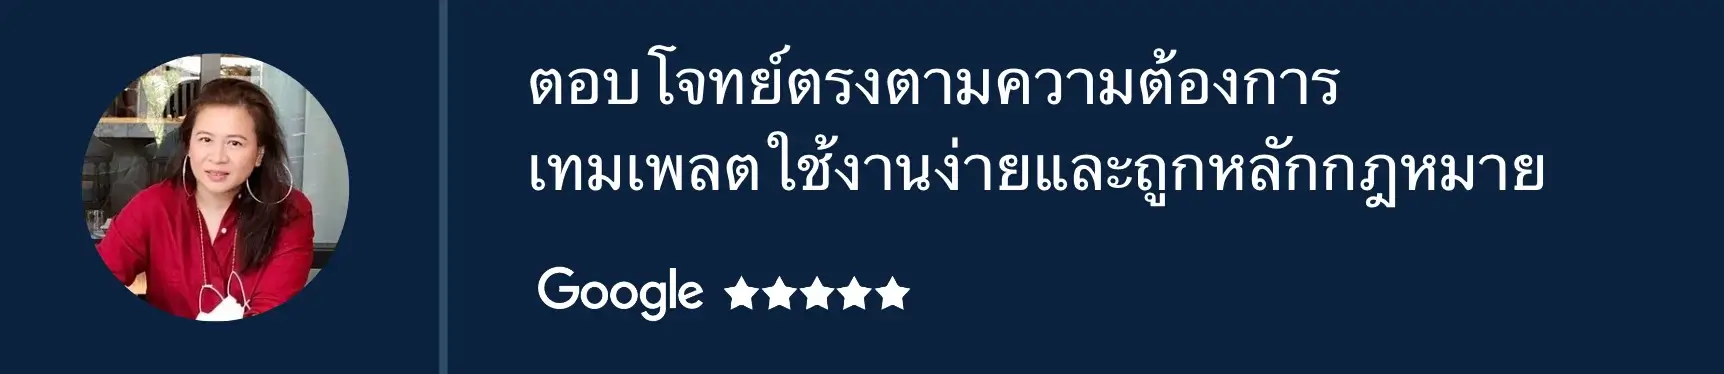 Thailand review 9